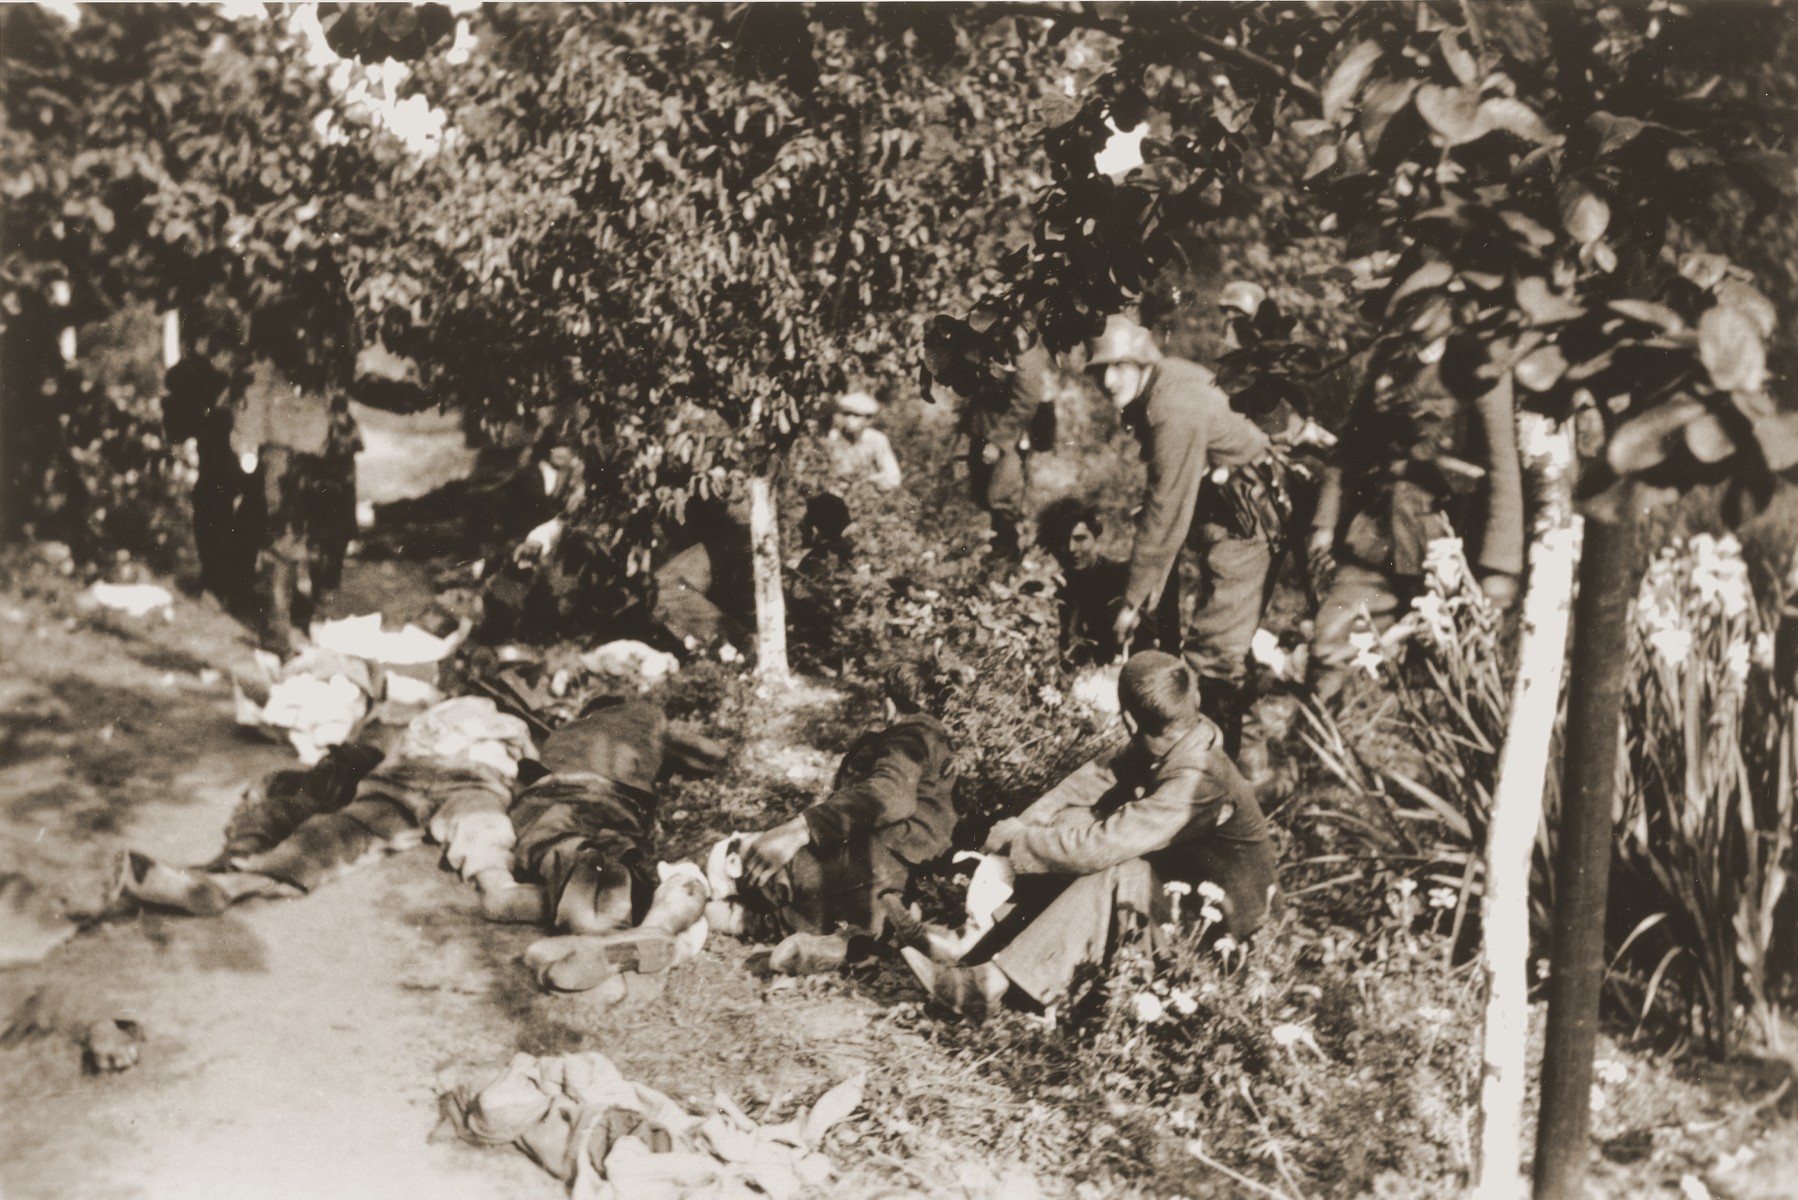 A young man, sitting among the bodies of murdered civilians in a park-like setting, has his head turned toward the German soldier standing over him. 

One photograph from an album belonging to a member of a Wehrmacht machine gunners' unit, which was found after the war by Lorenzo Hawkins (the donor's grandfather), an American serviceman in Company B, 56th Armored Engineer Battalion.